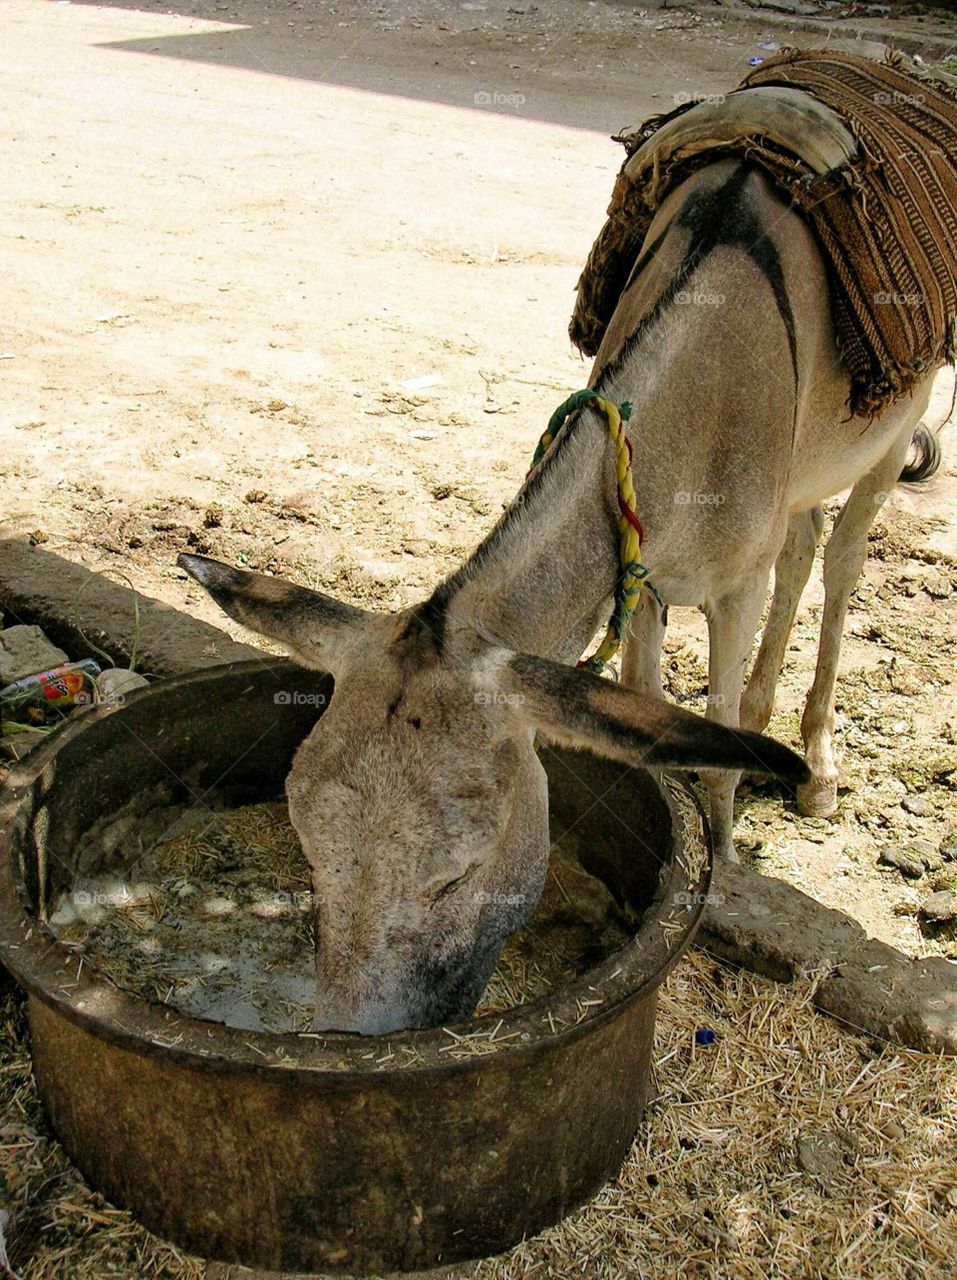 Beast of burden stops for a drink in Egypt